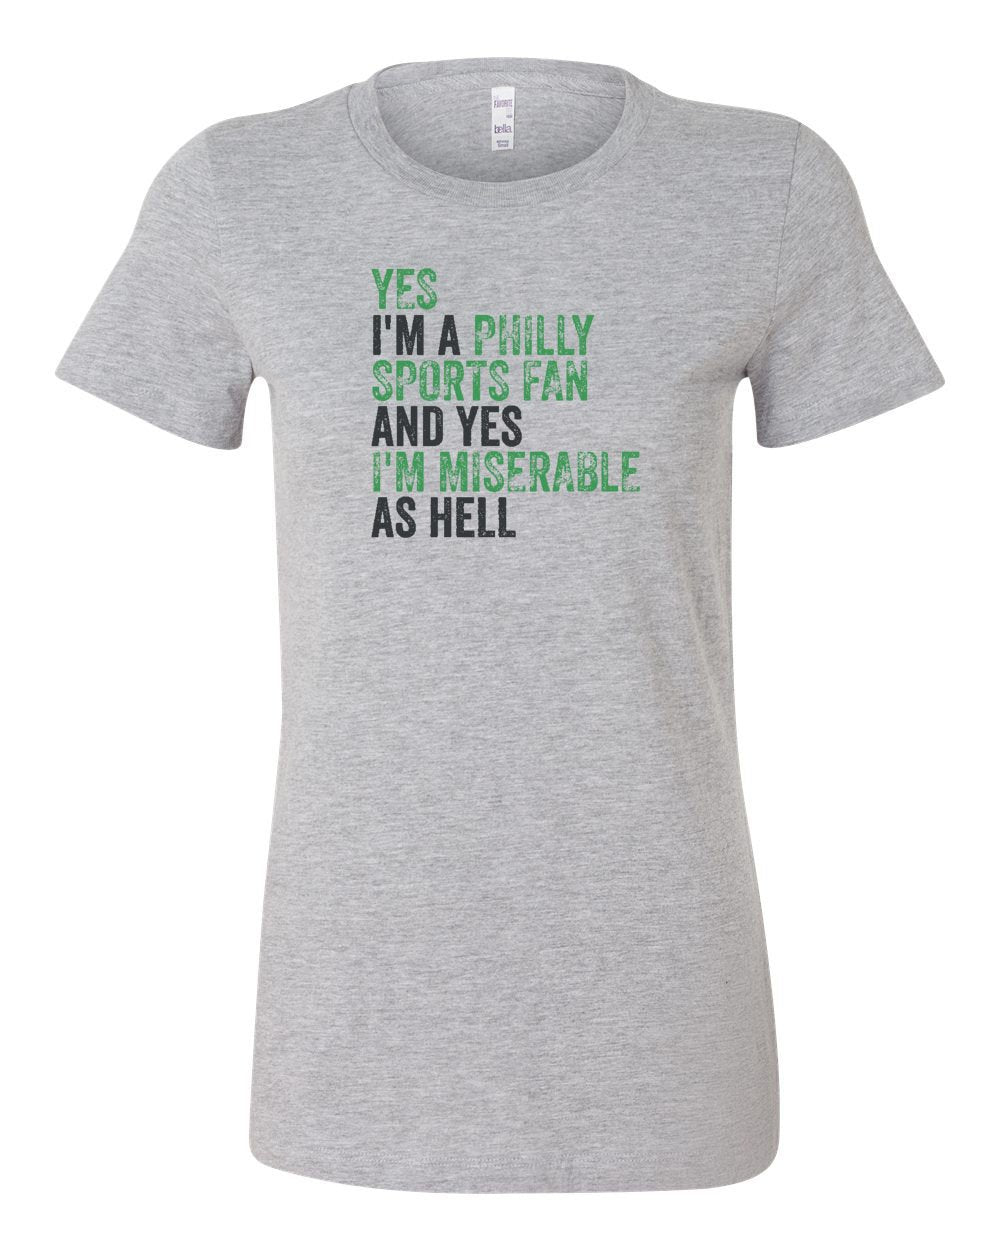 Philly Sports Fan Football LADIES Junior-Fit T-Shirt